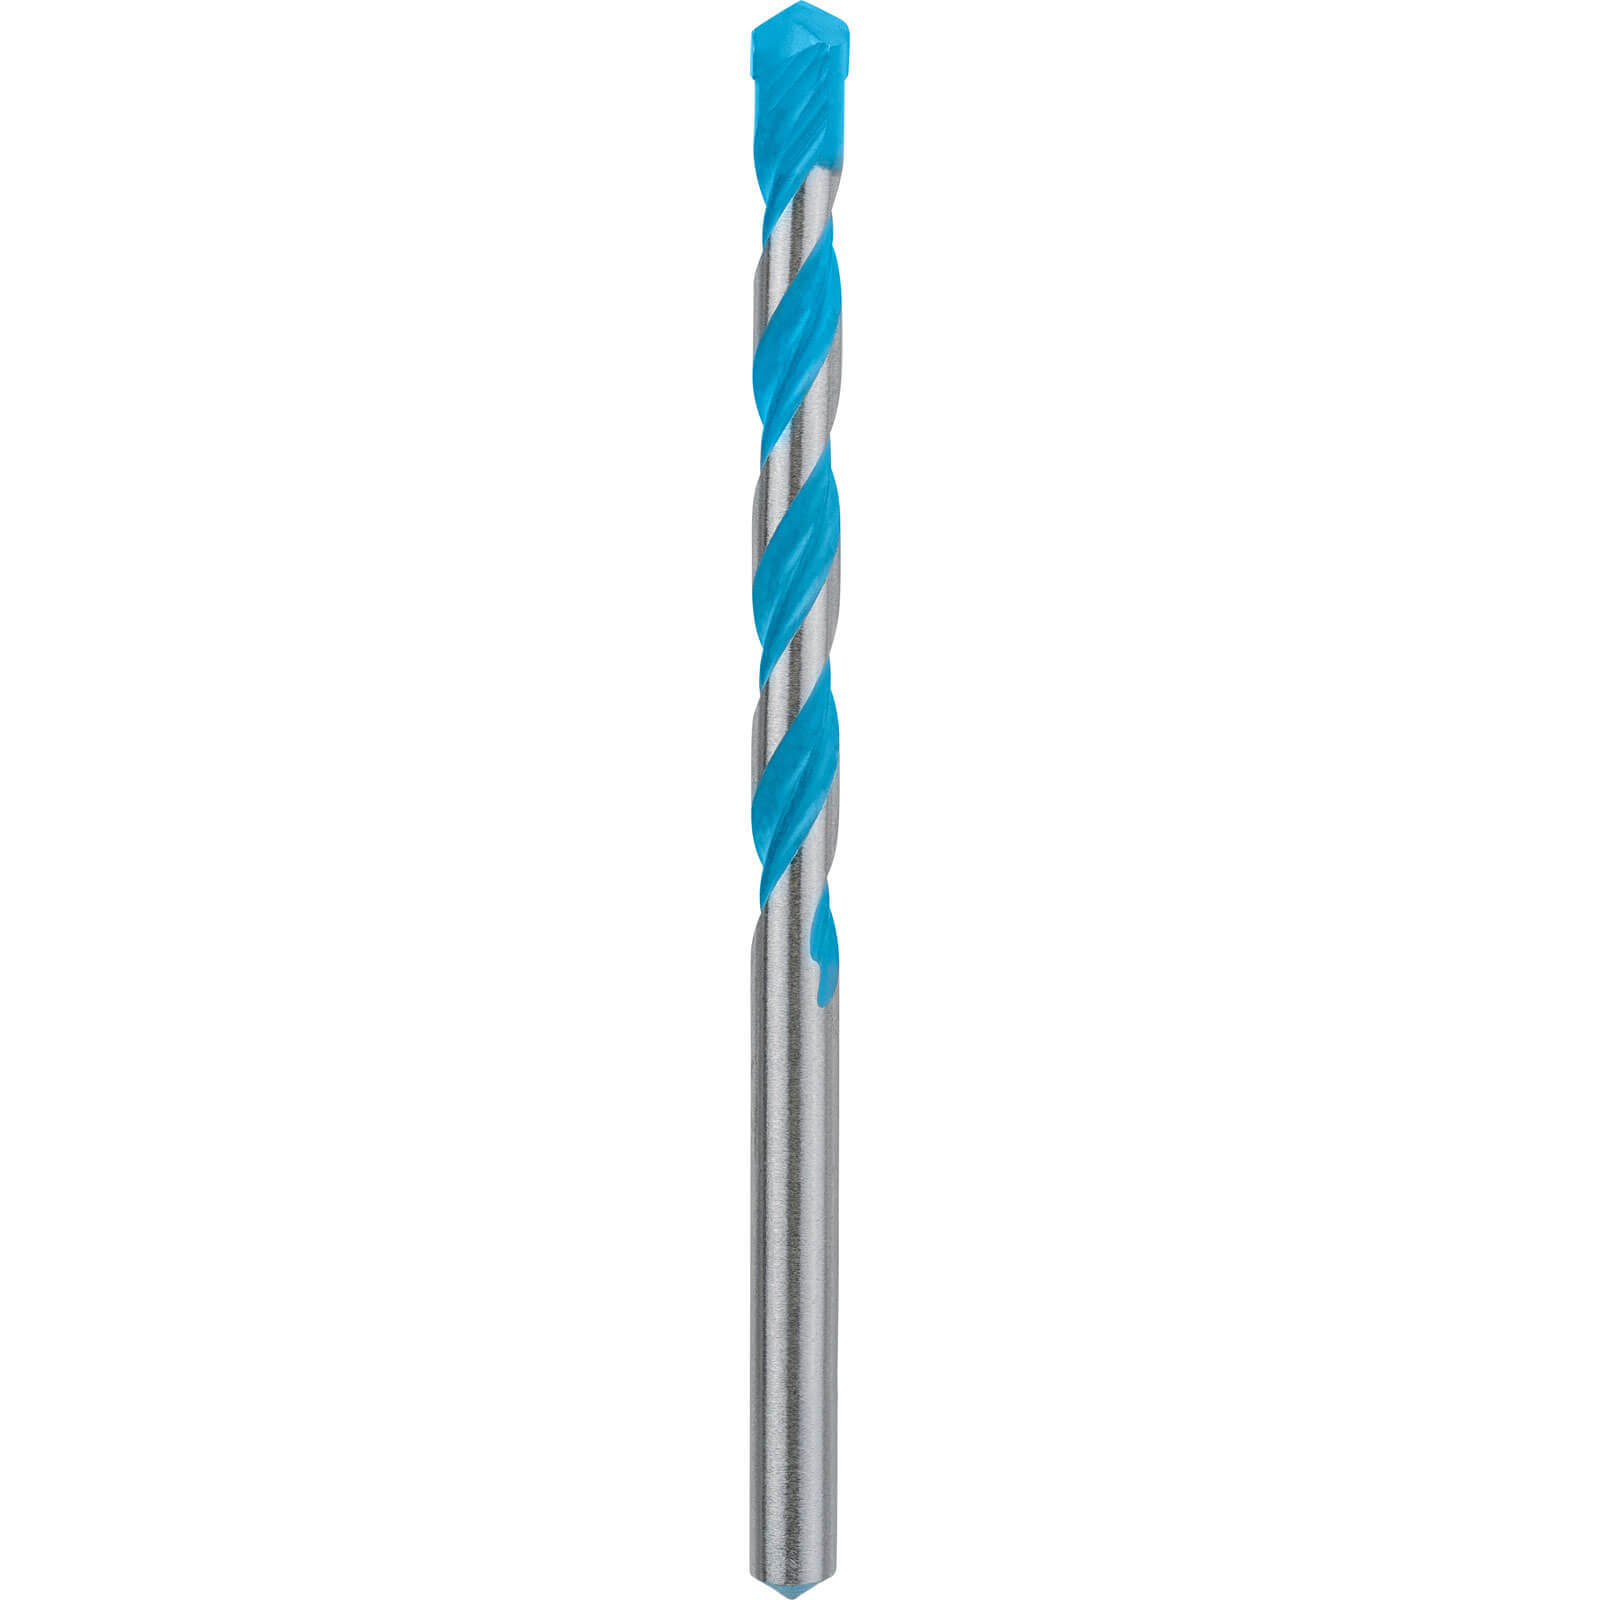 Image of Bosch Expert CYL-9 Multi Construction Drill Bit 6.5mm 100mm Pack of 1